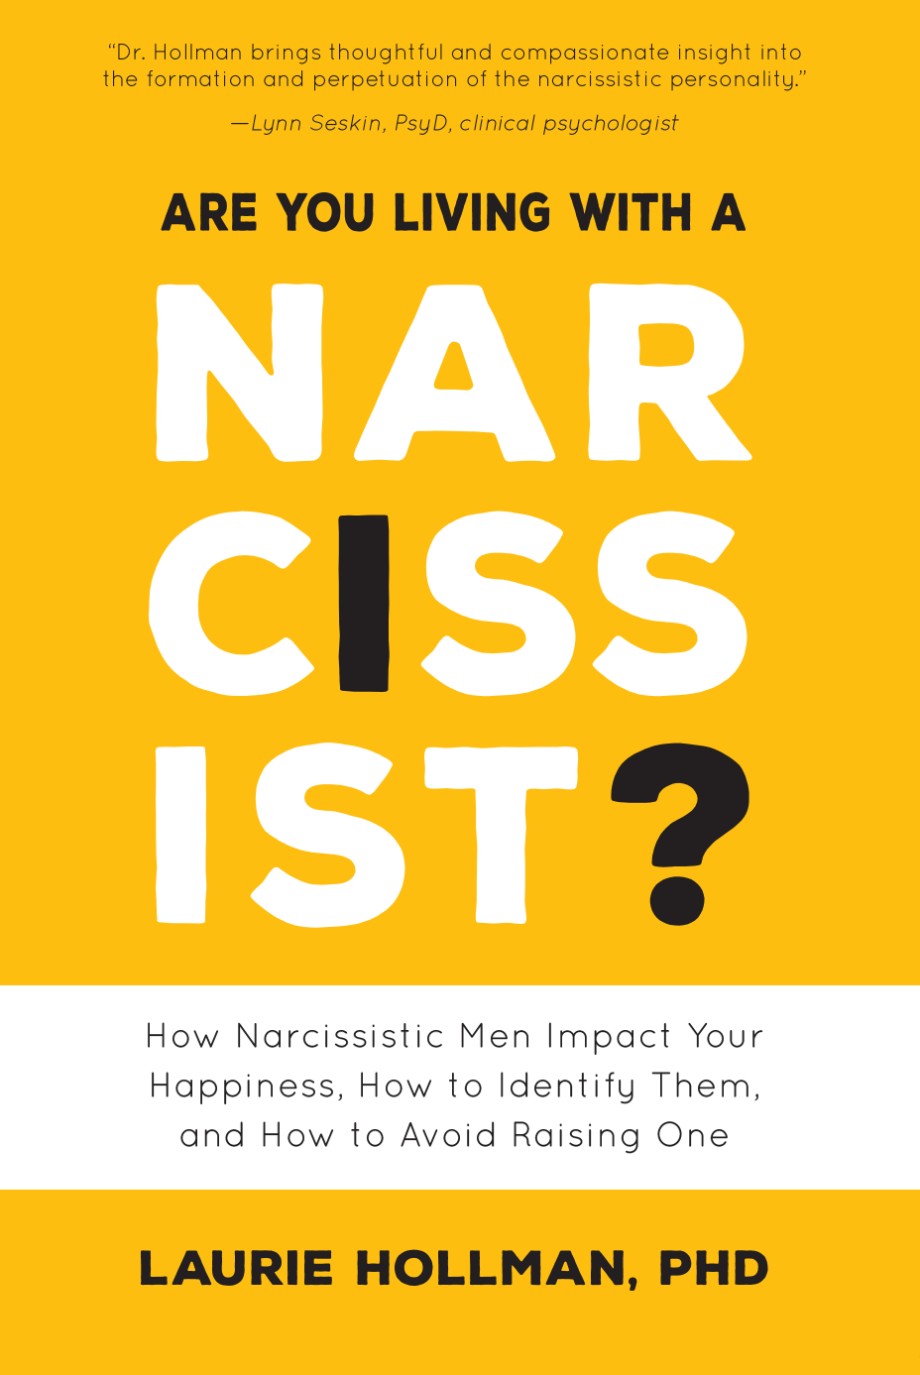 Are You Living with a Narcissist? How Narcissistic Men Impact Your Happiness, How to Identify Them, and How to Avoid Raising One